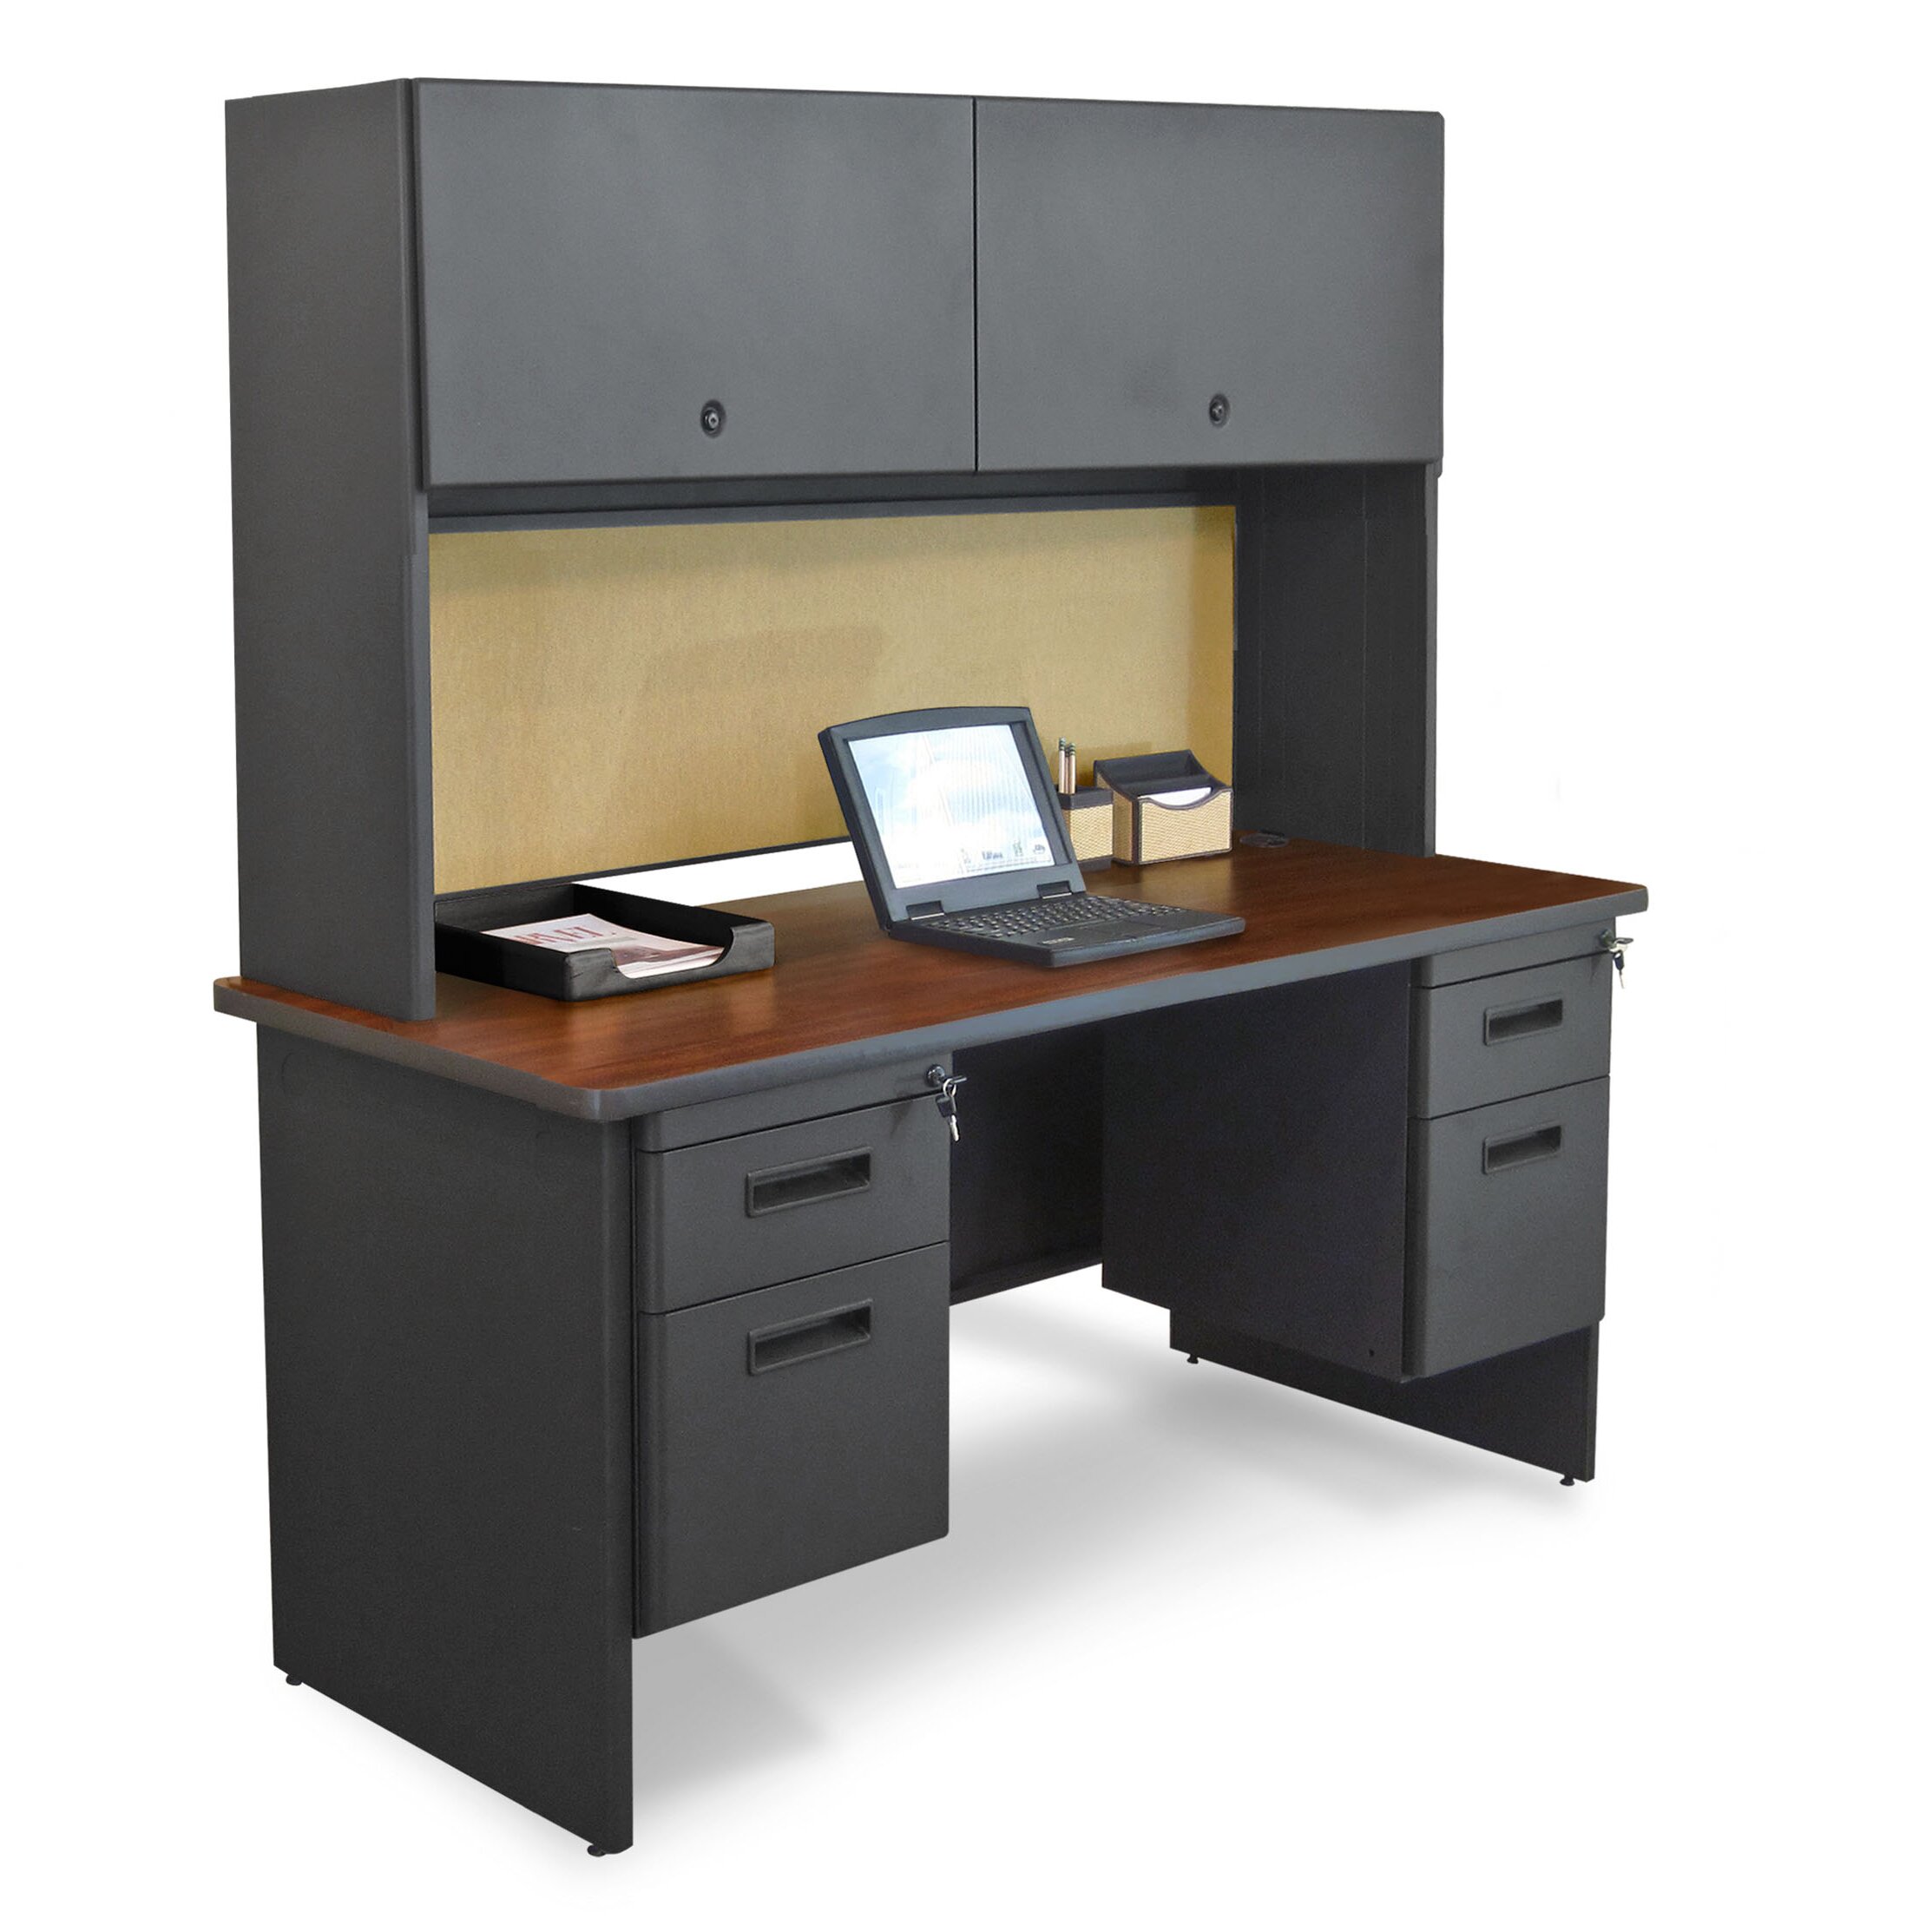 Marvel Office Furniture Pronto Flipper Door Cabinet Executive Desk with 2 Right and 2 Left Drawers